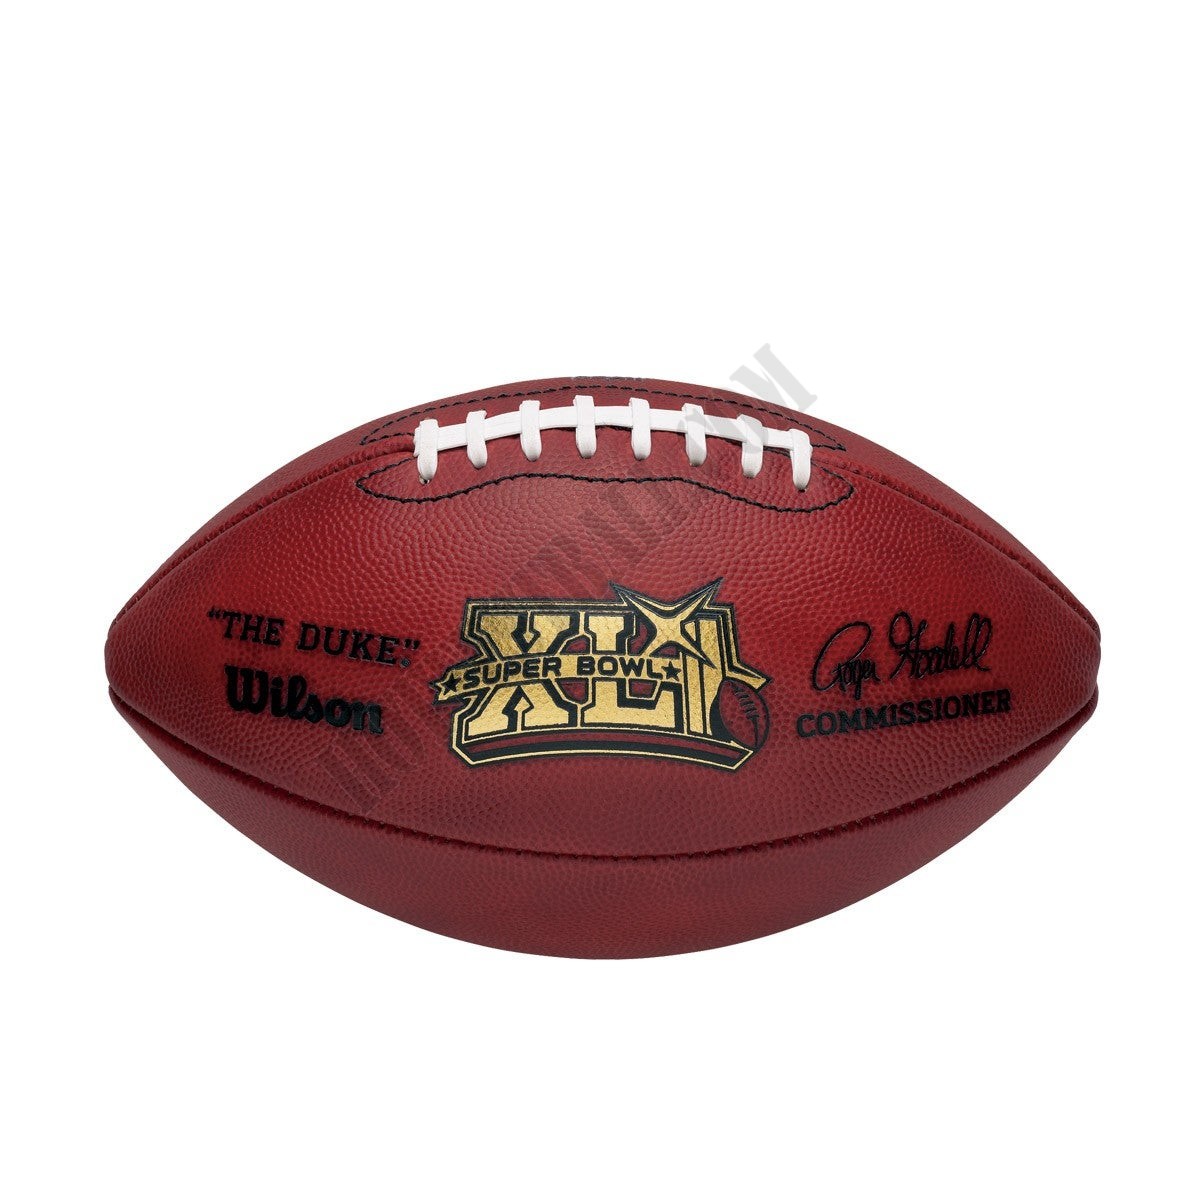 Super Bowl XLI Game Football - Indianapolis Colts ● Wilson Promotions - -0